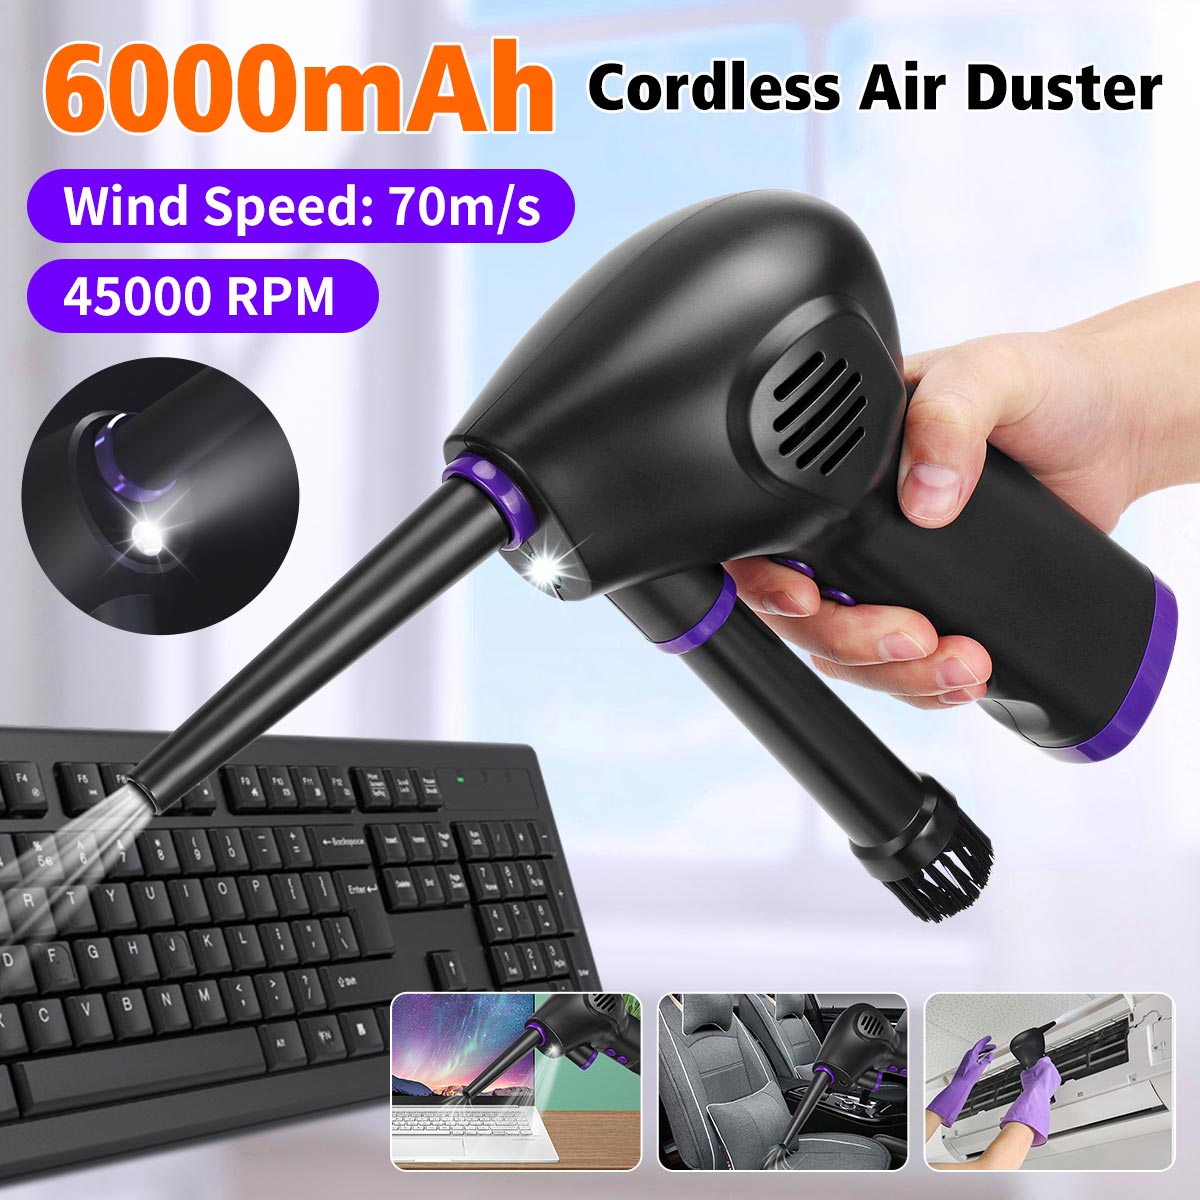 6000mAh-70ms-Cordless-Air-Duster-For-Computer-Cleaning-Replaces-Compressed-Spray-Gas-Cans-Rechargeab-1902465-1